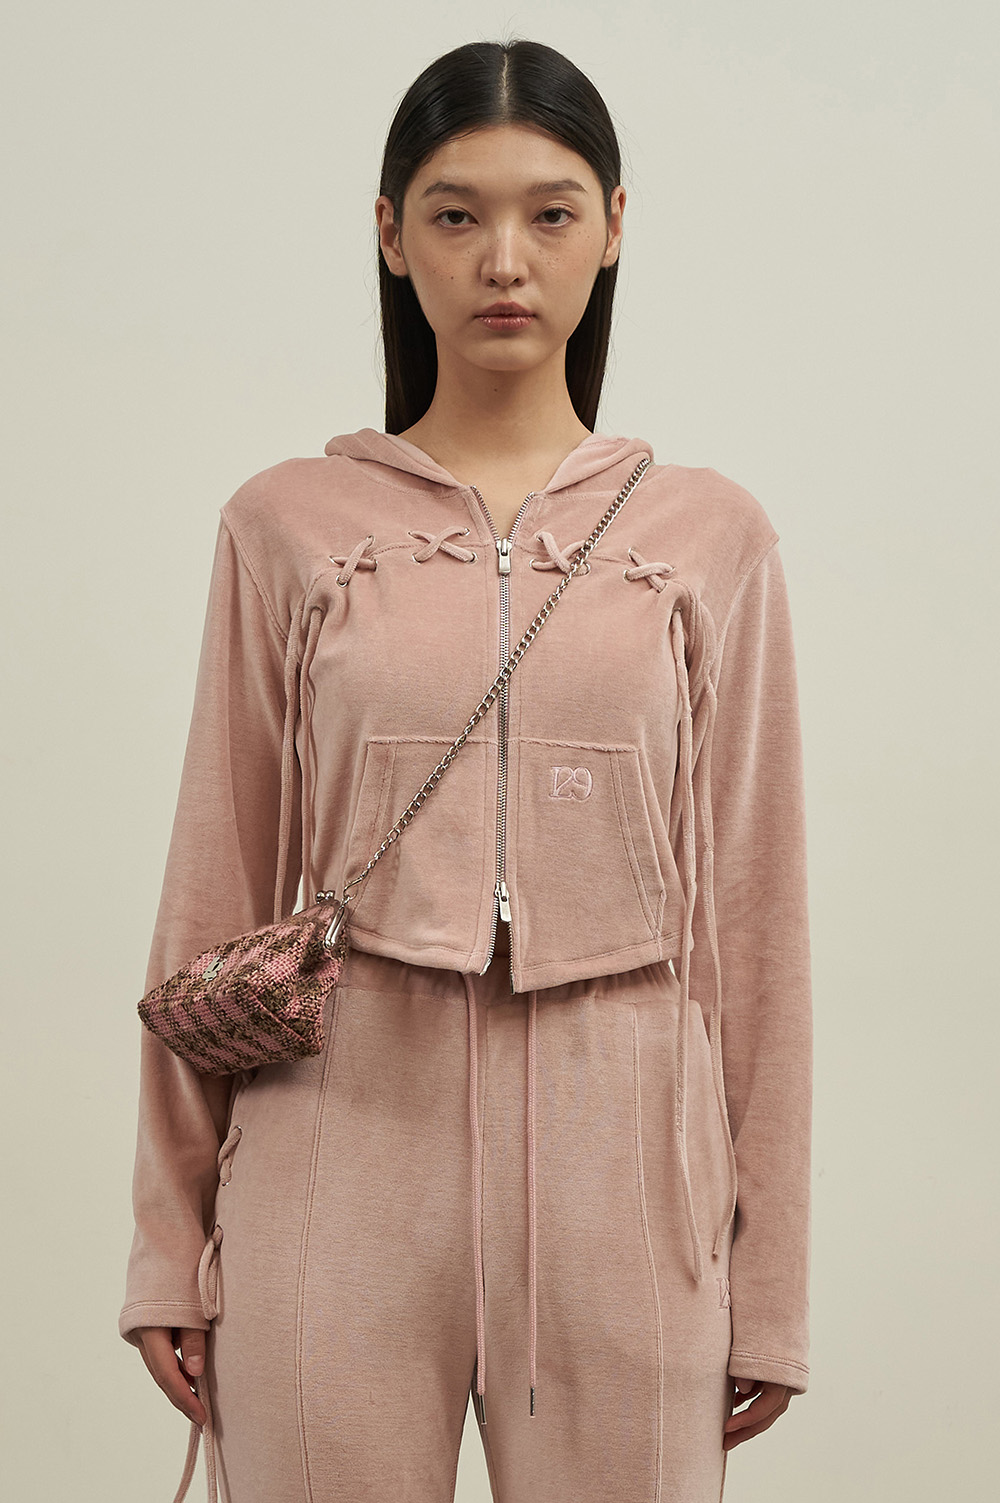 Veloa Lace Up Hooded Zip-Up Pink